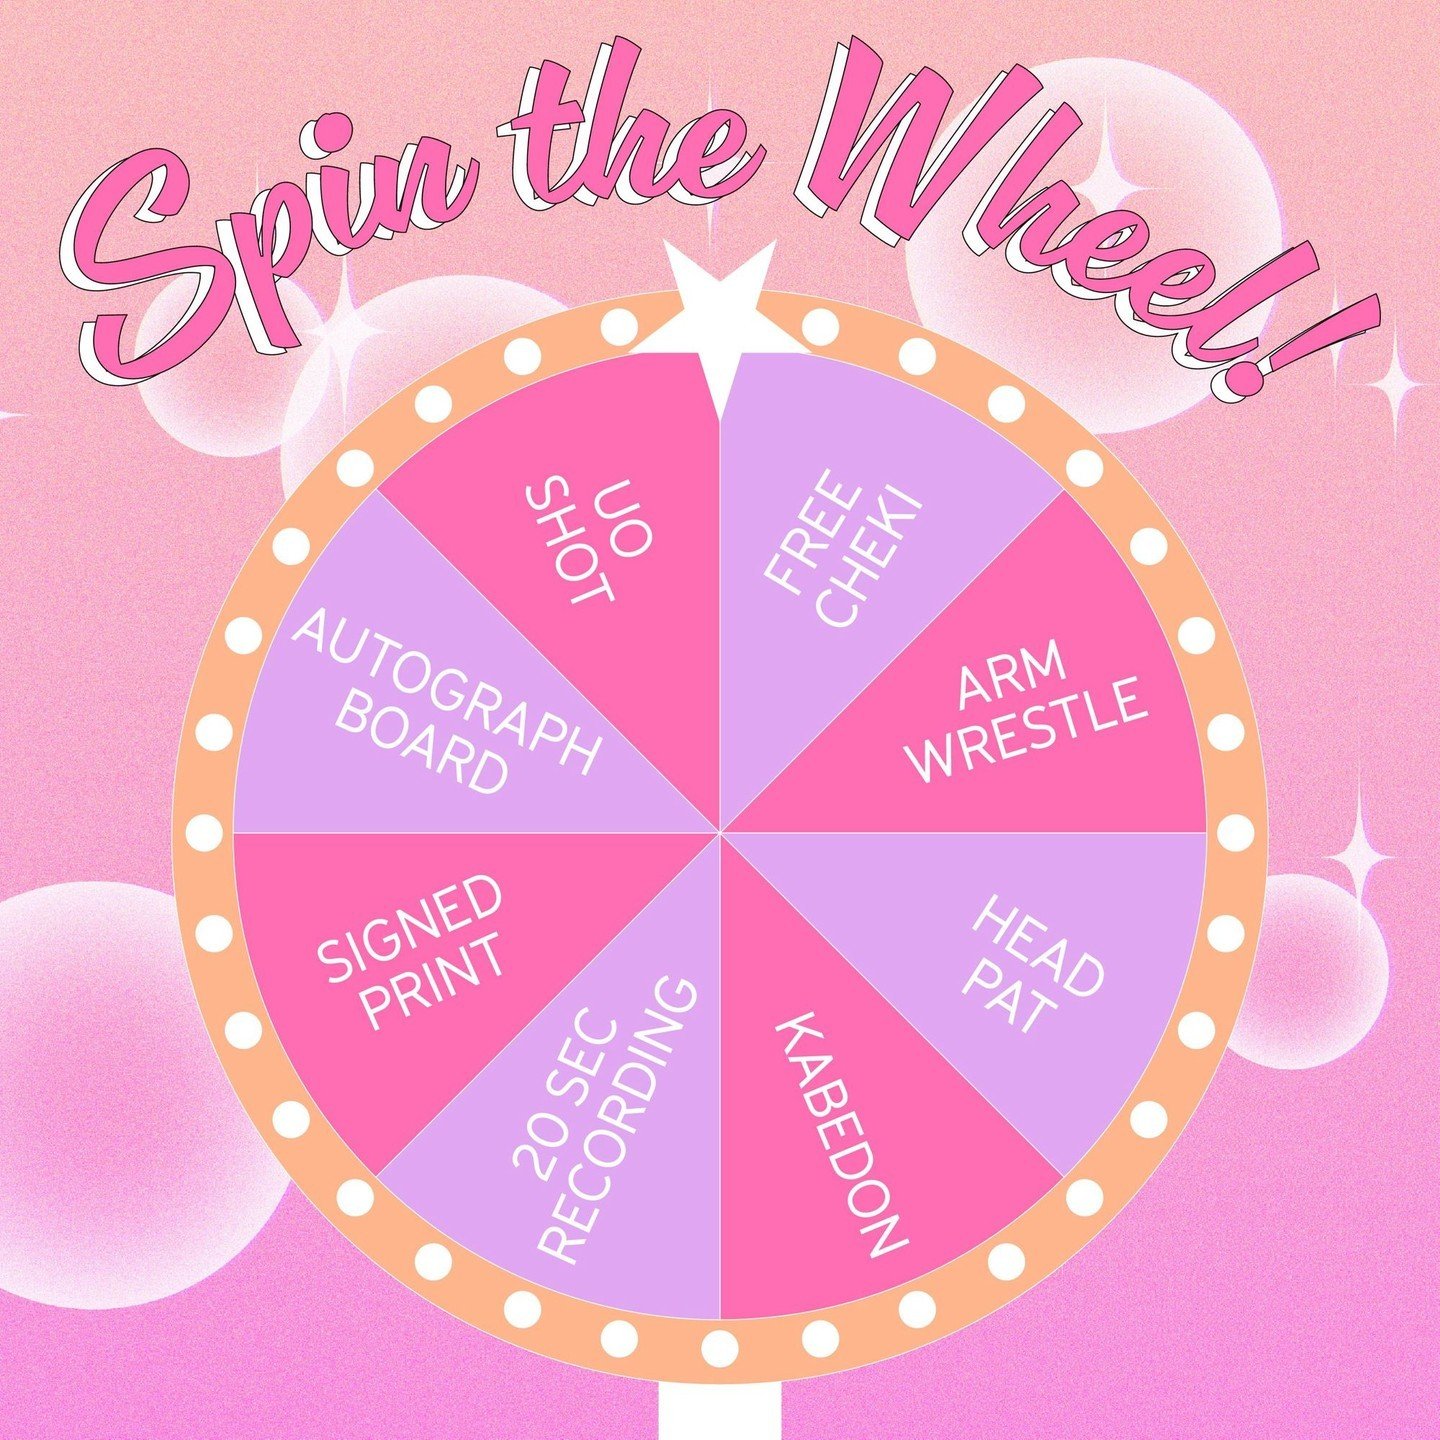 Step right up at Happy Hour! 🎁
Play our Spin the Wheel game for the chance to win some fun prizes at our Happy Hour Concept Bar event! Grab a token on the night for $10 🎊 

#idol #kaigaiidol #overseasidol #jpop #girlgroup #アイドル